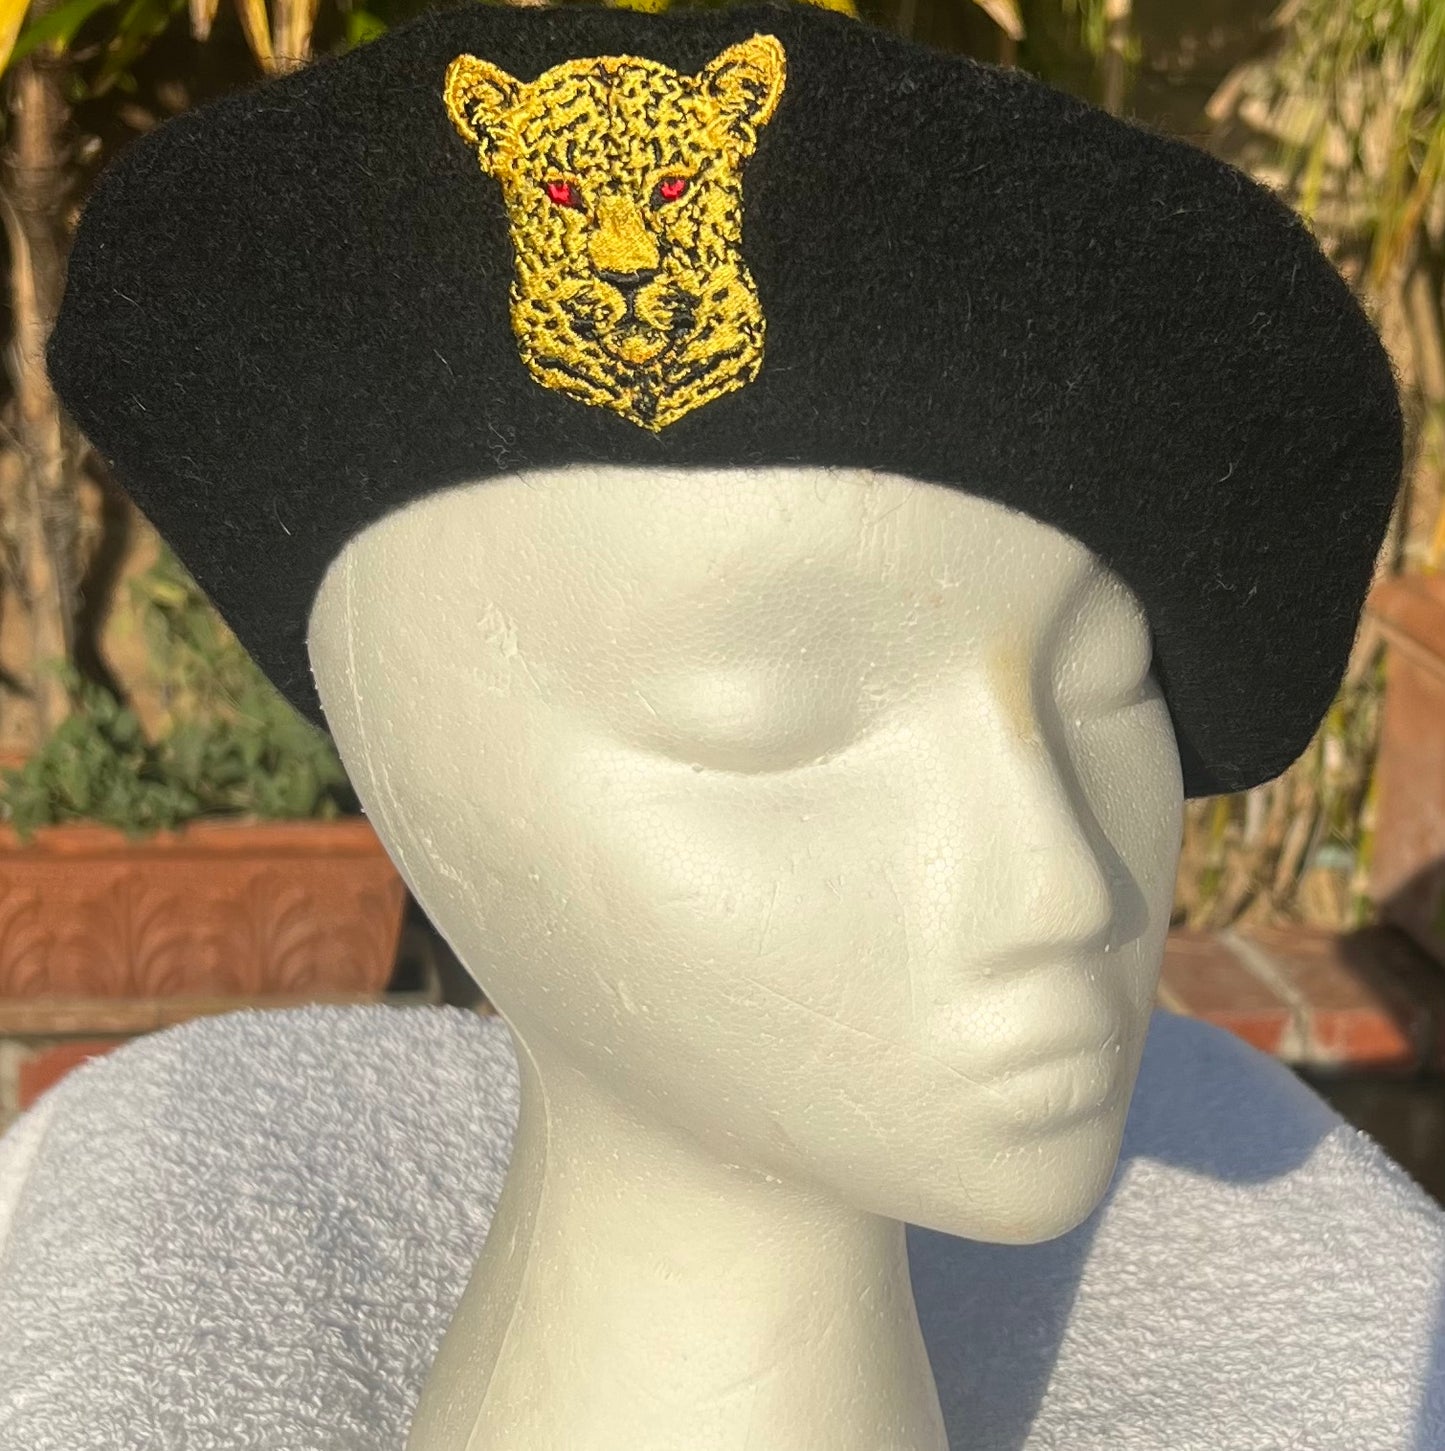 ROYAL FRENCH BERET EMBROIDERED LEPPARD CREST NAVY